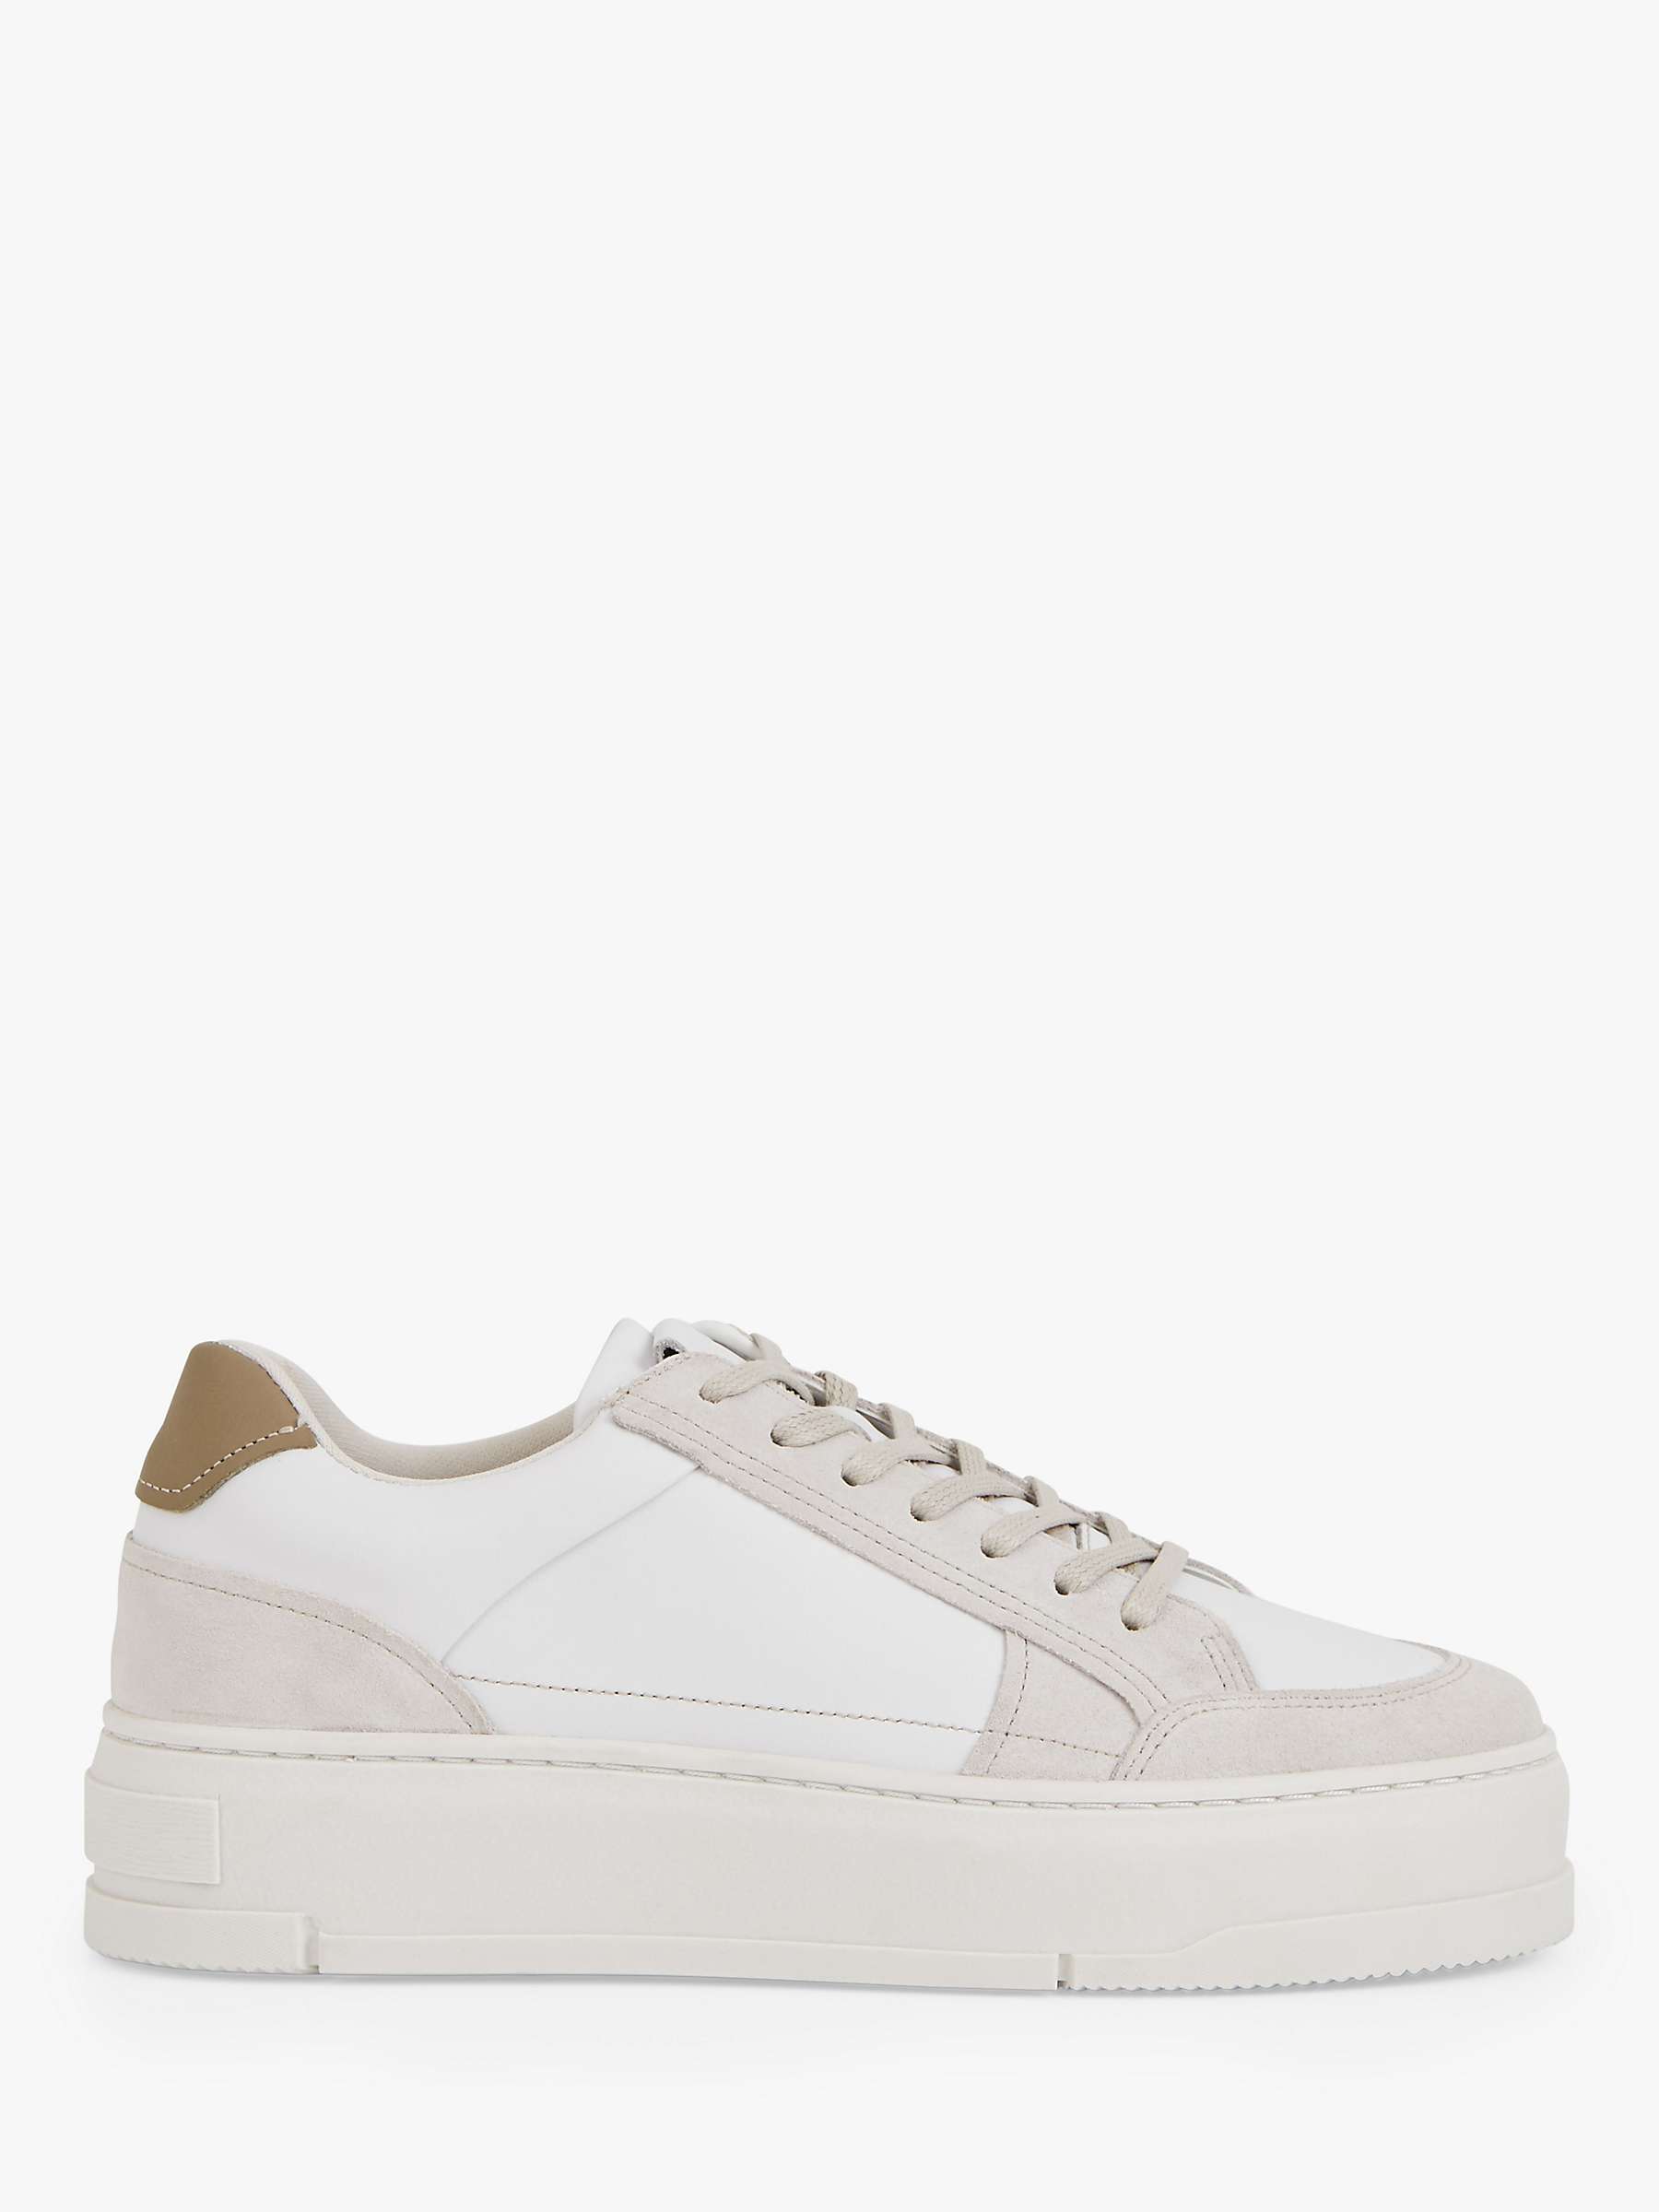 Vagabond Shoemakers Judy Leather Trainers, White Salt at John Lewis ...